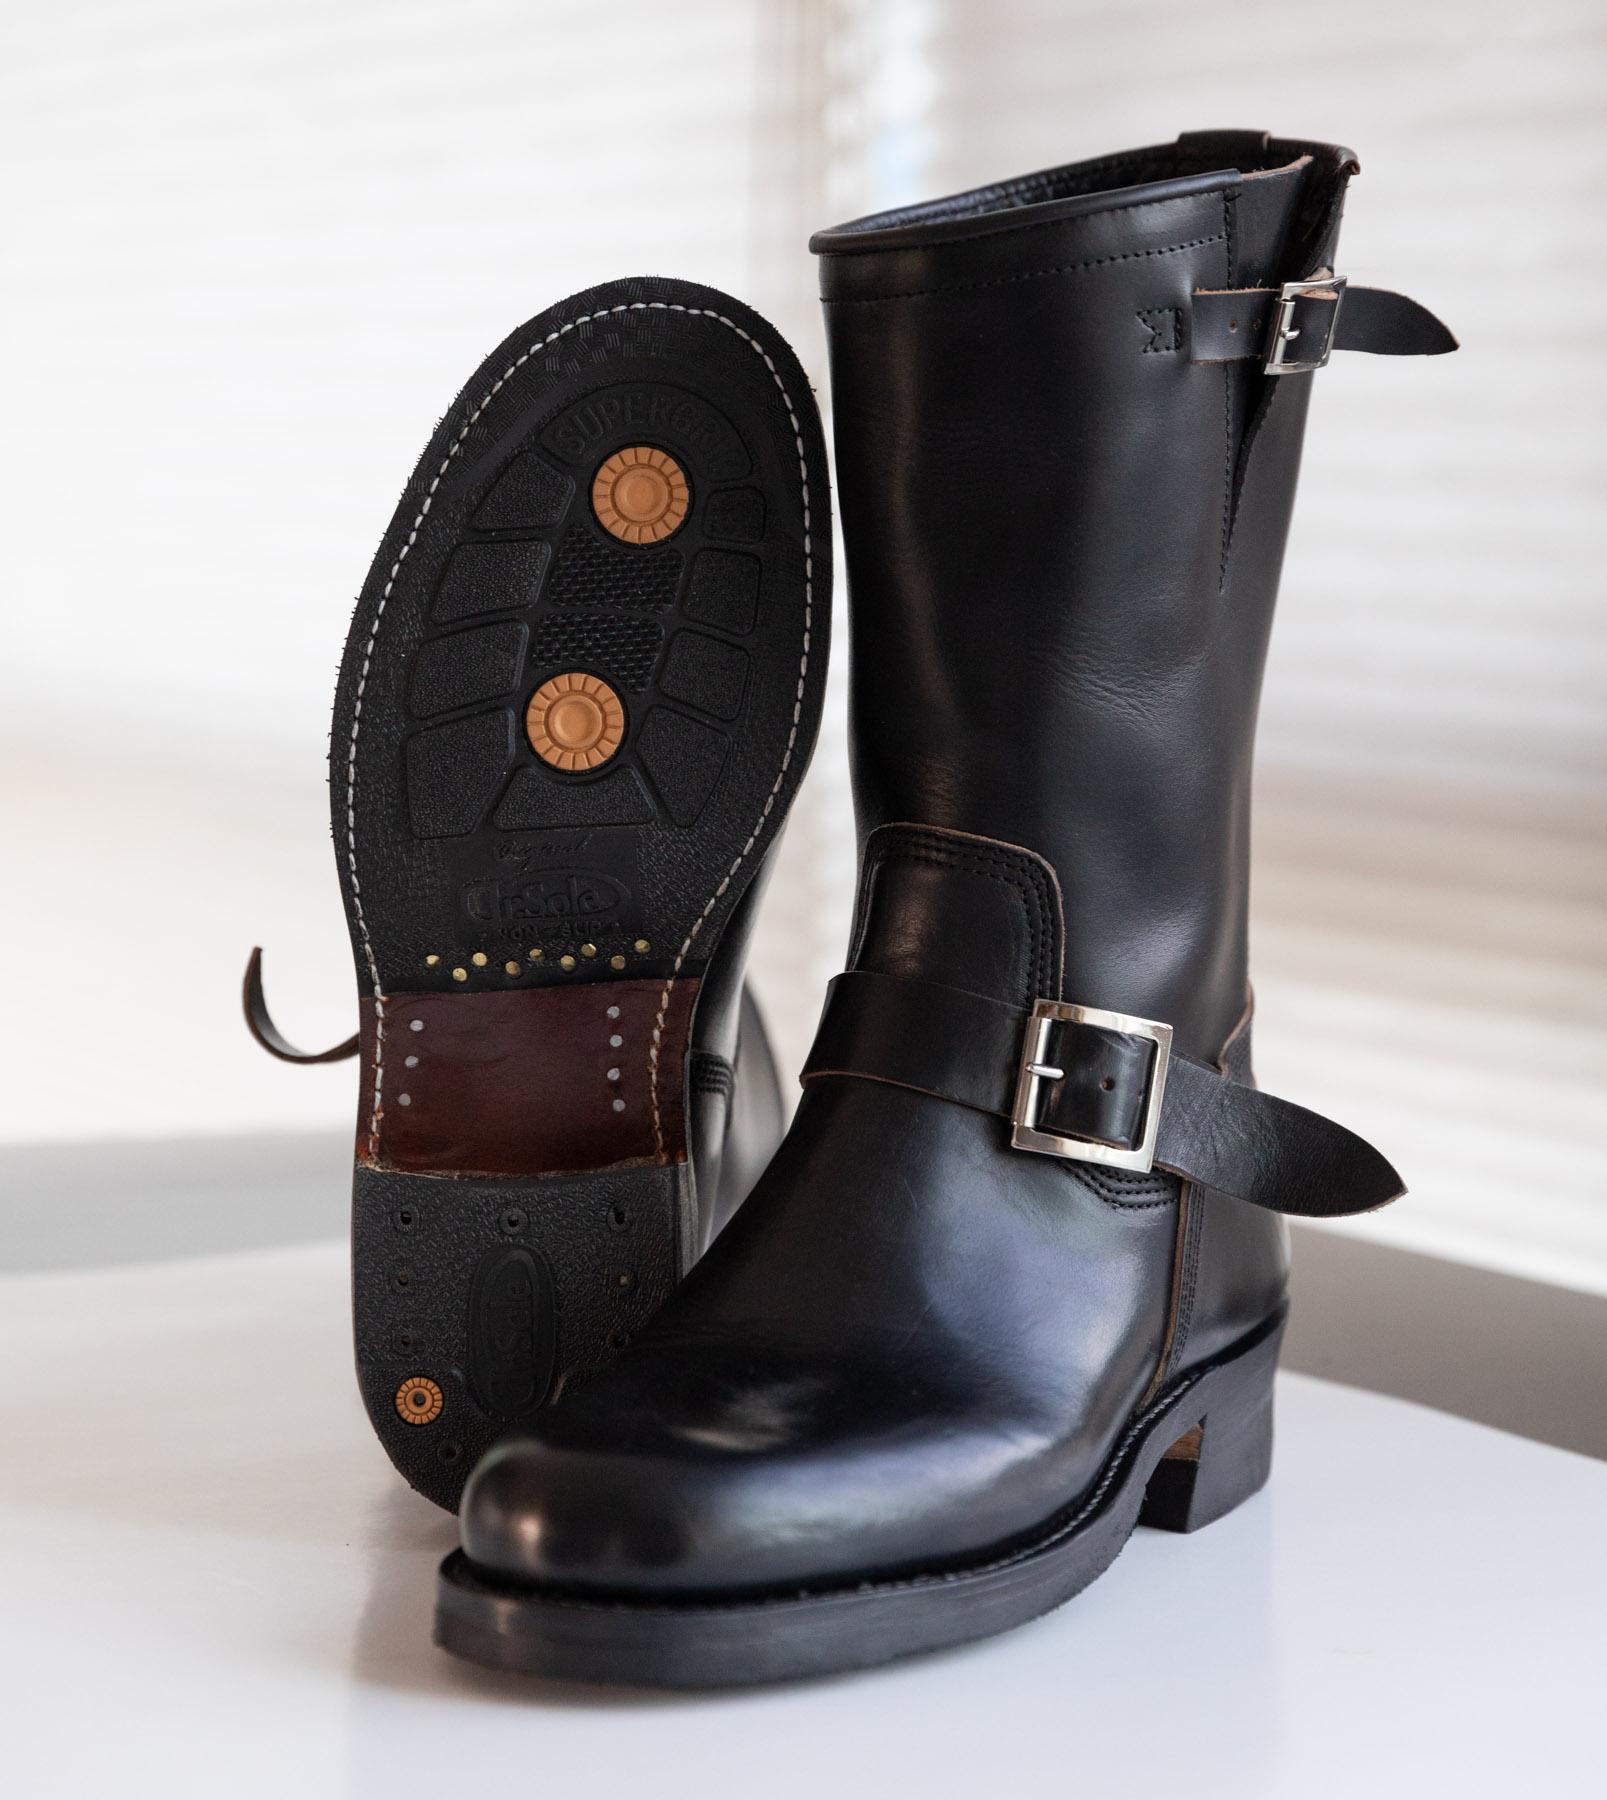 New black engineer boots. My fourth leather project. - Shoes, Boots ...